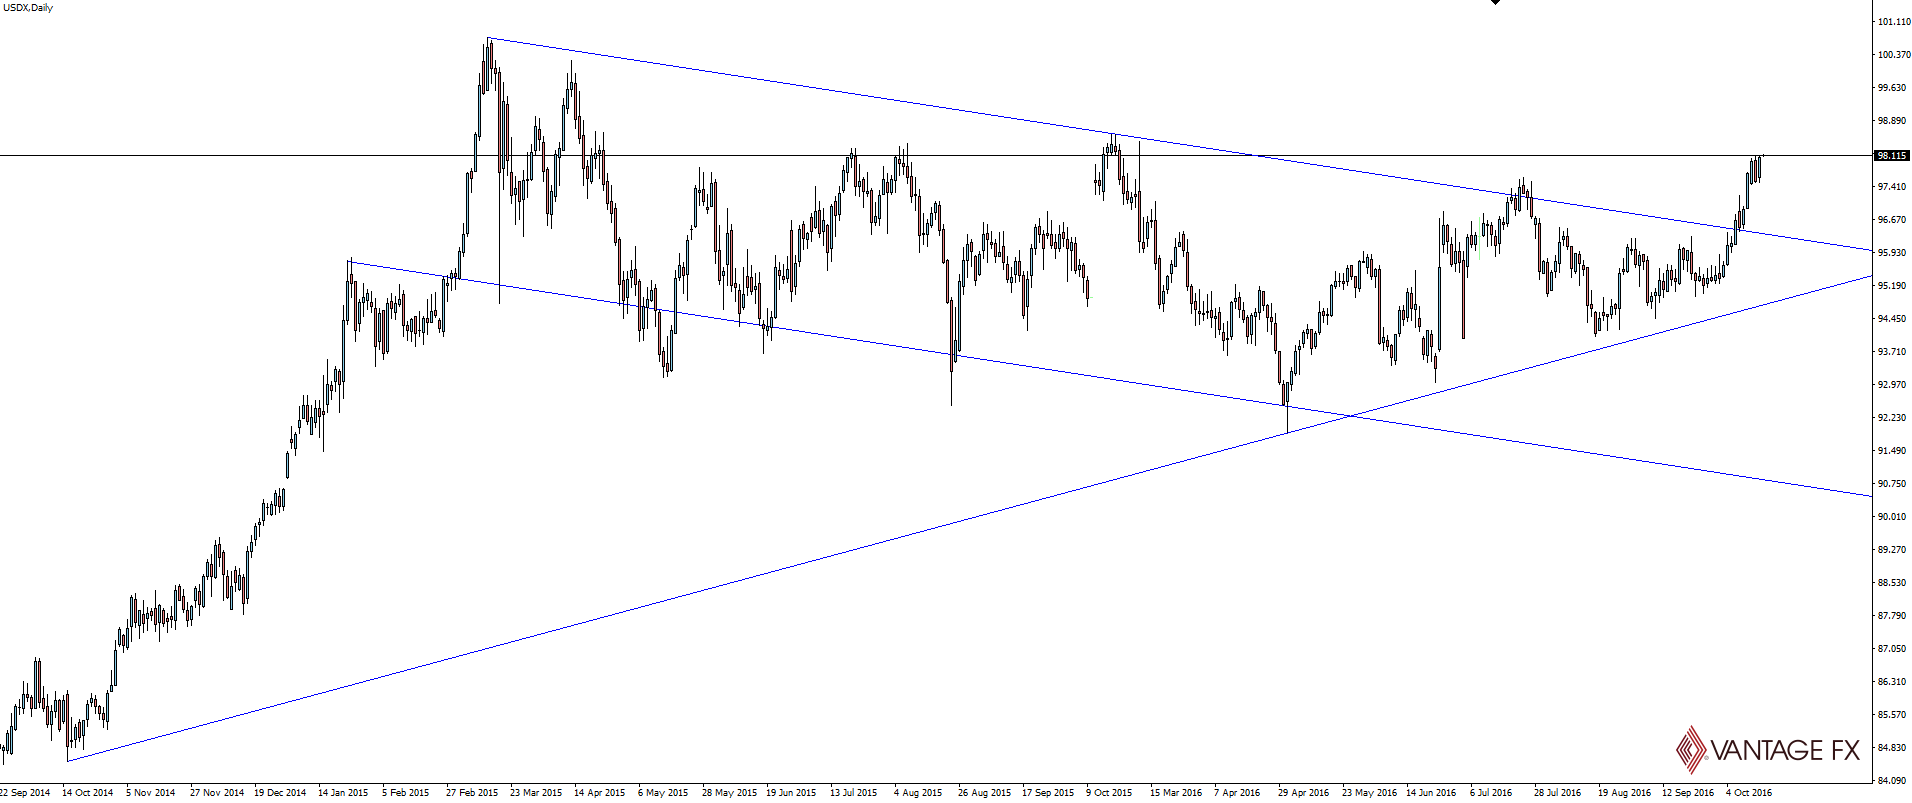 USDX Daily Chart